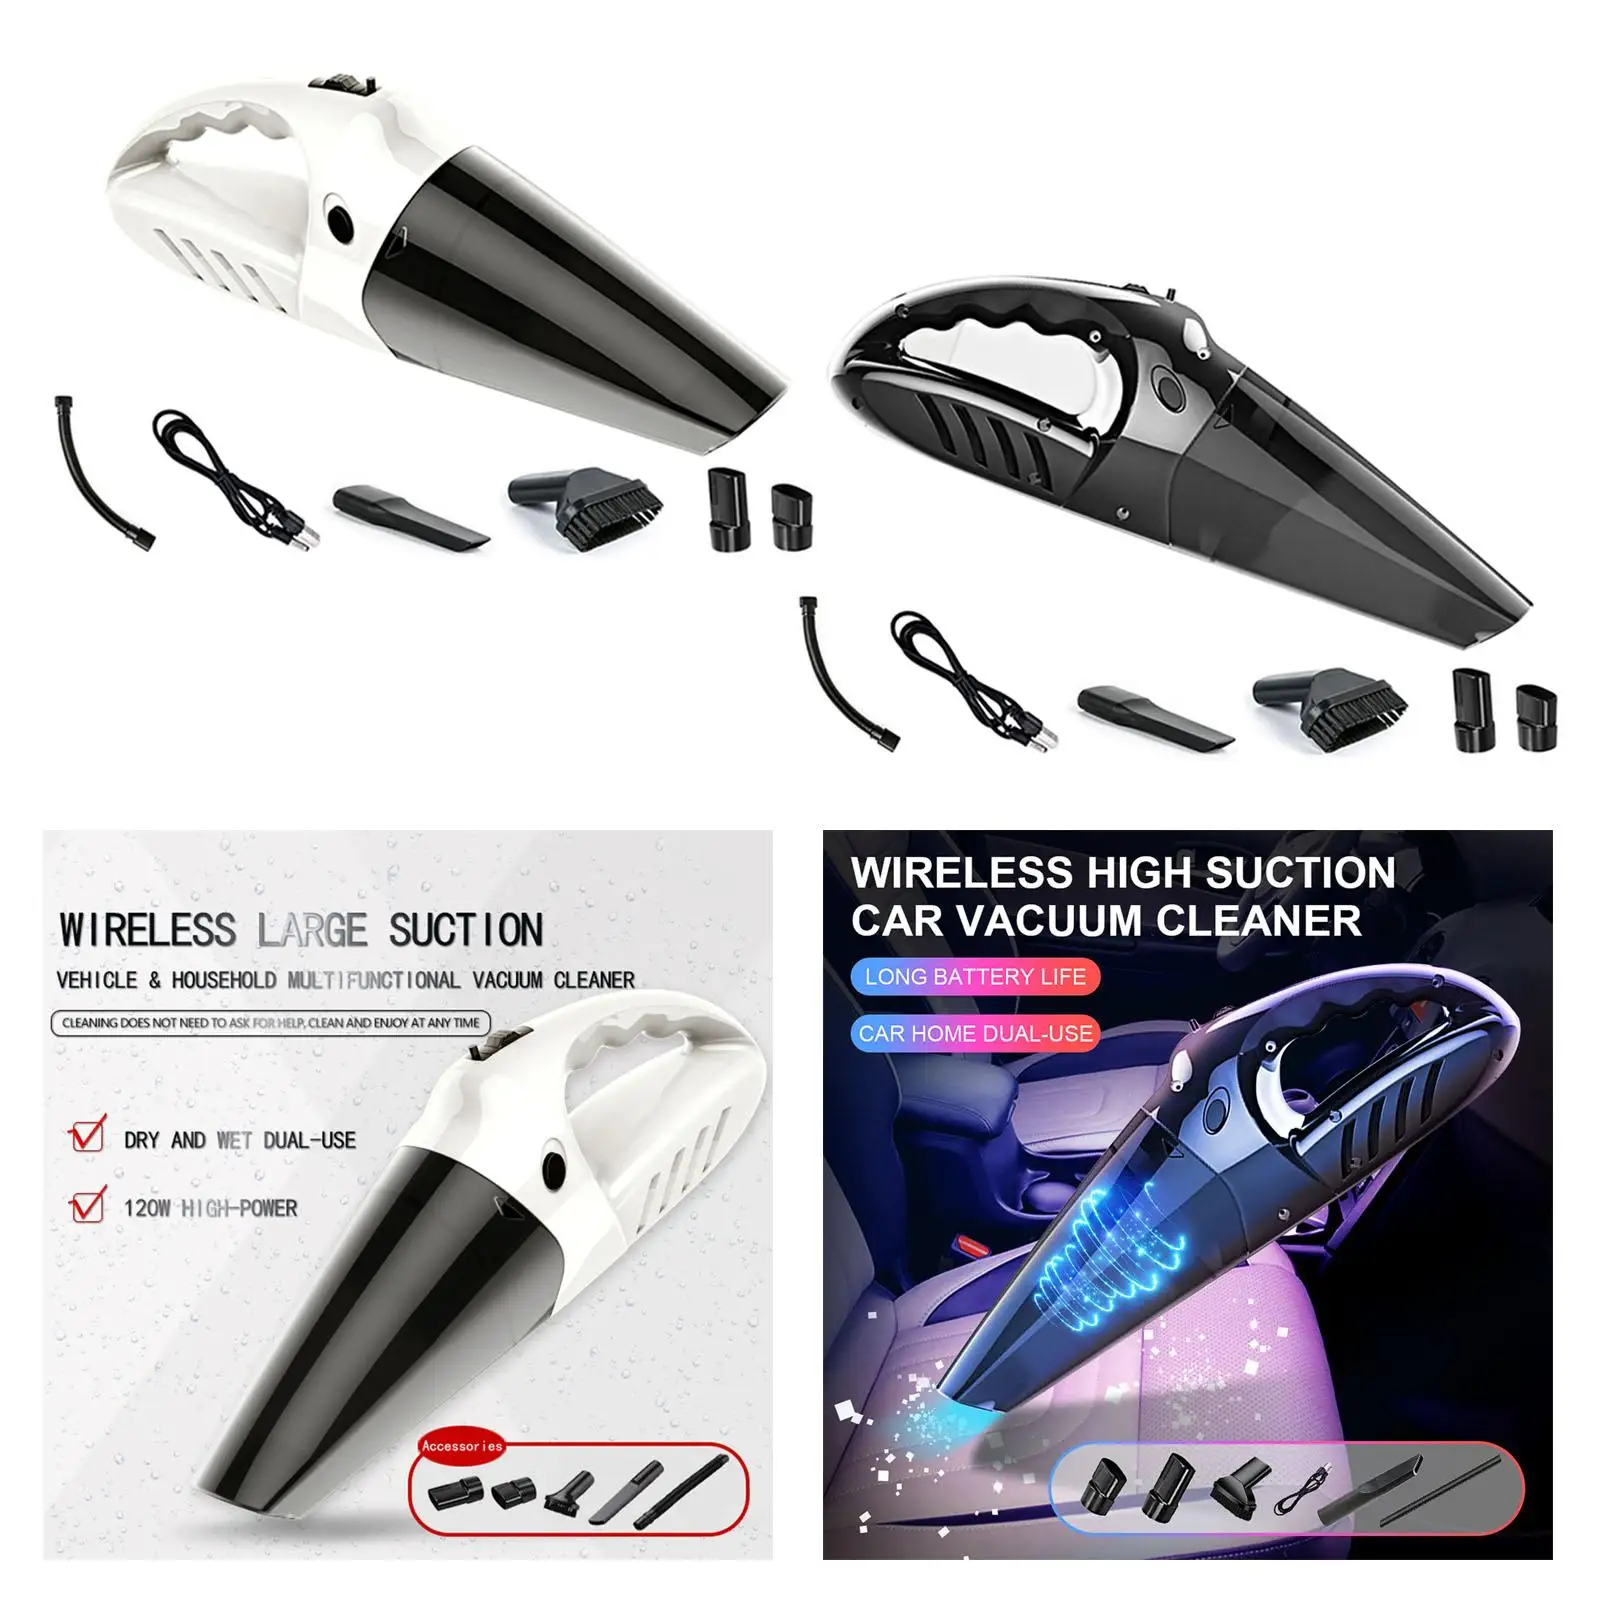 Portable Handheld Vacuum Powerful with 4 Attachments 4500PA Strong Suction 120W Car Vacuum Cleaner for Home Sofa Car Seat